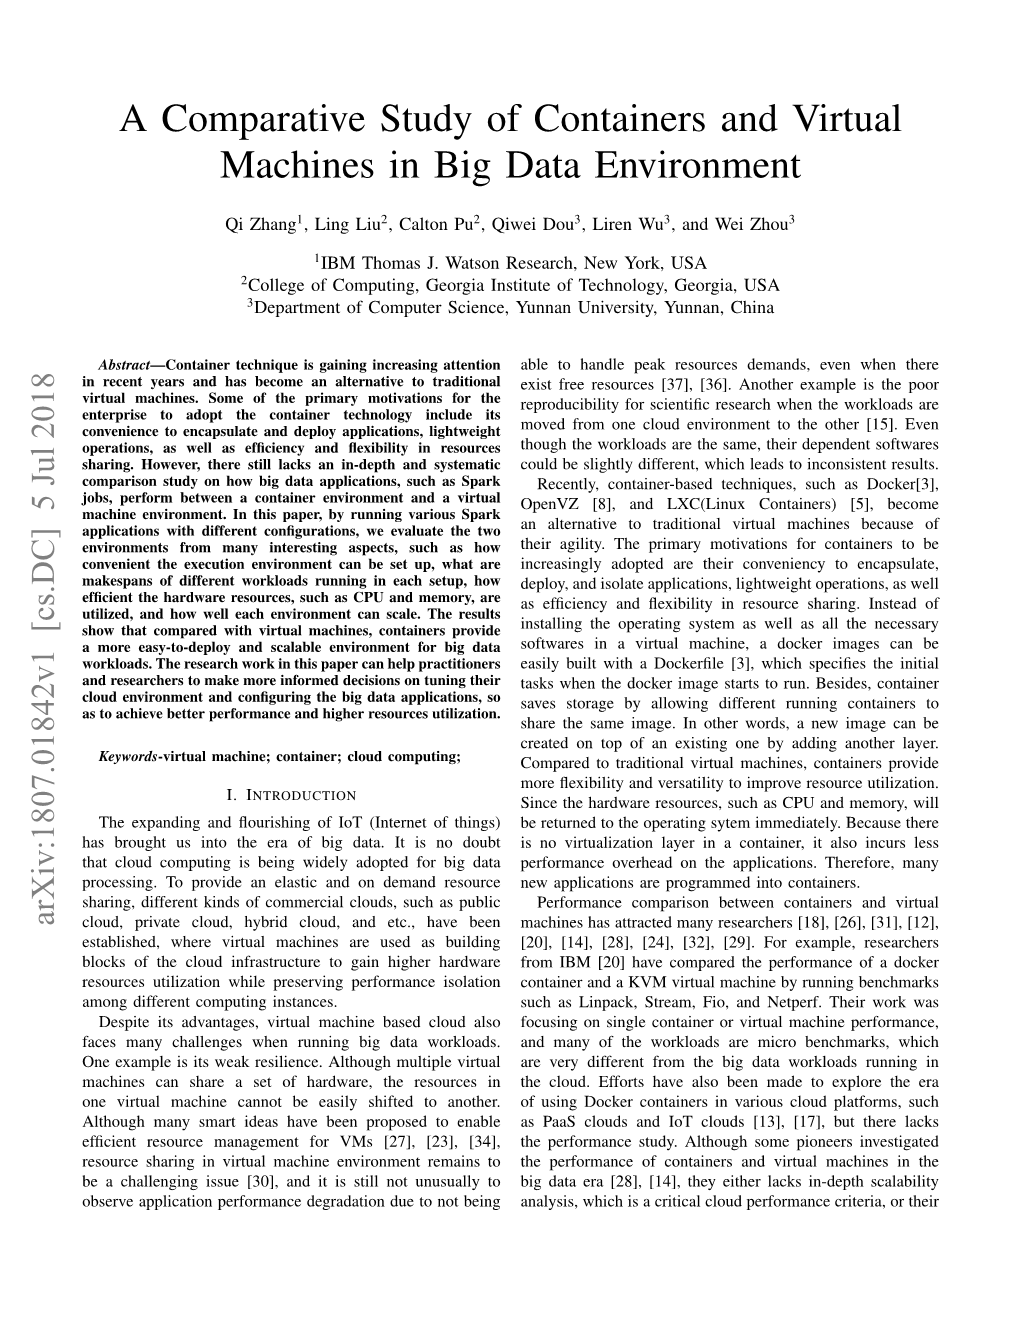 A Comparative Study of Containers and Virtual Machines in Big Data Environment